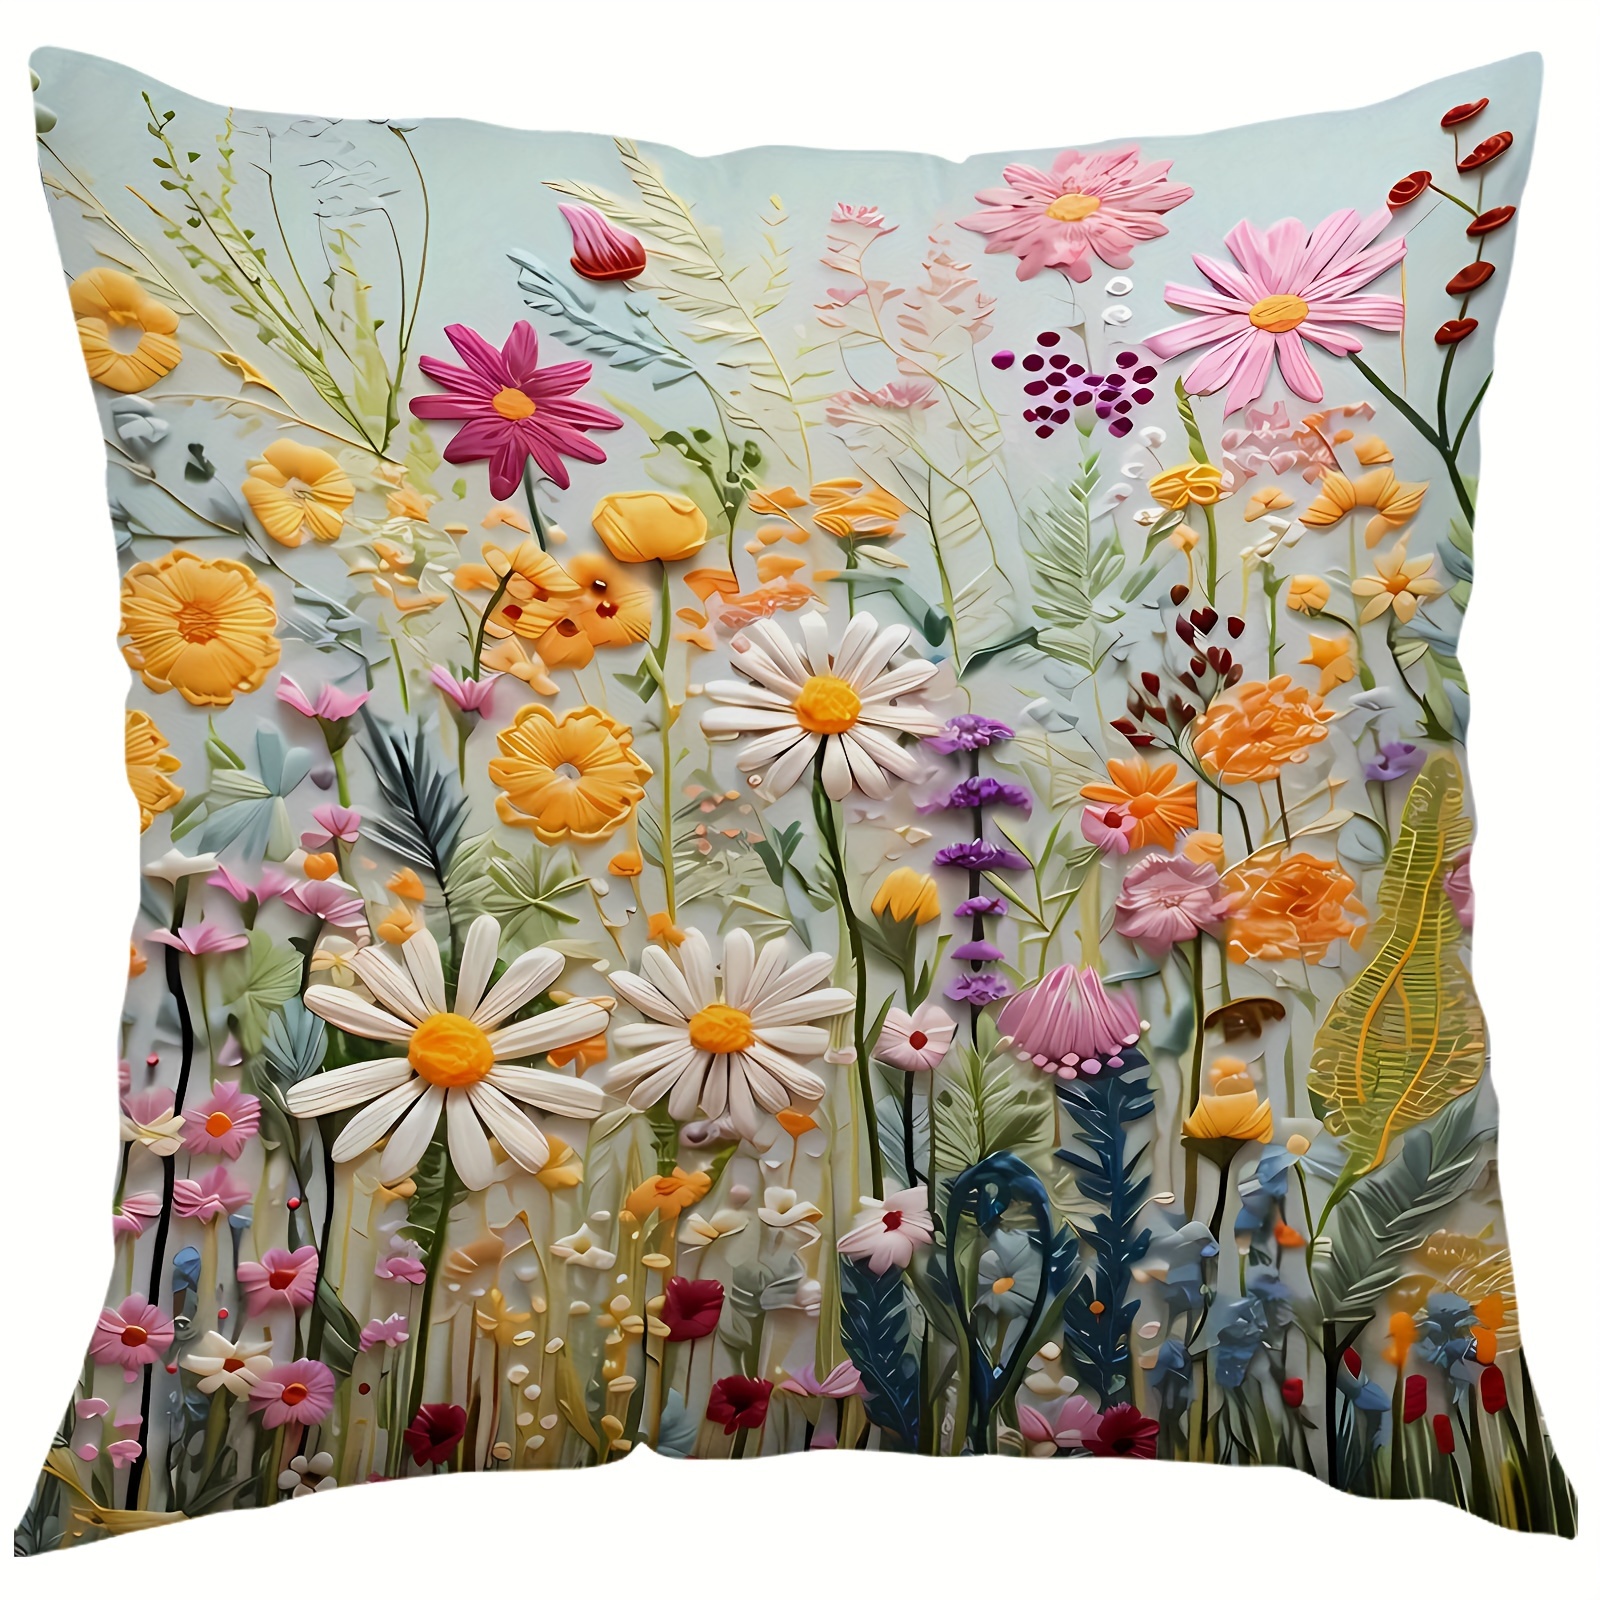 

Colorful Floral Plush Throw Pillow Cover 18x18 Inches - Zippered, Single-sided Print, Perfect For Sofa & Bedroom Decor, Machine Washable